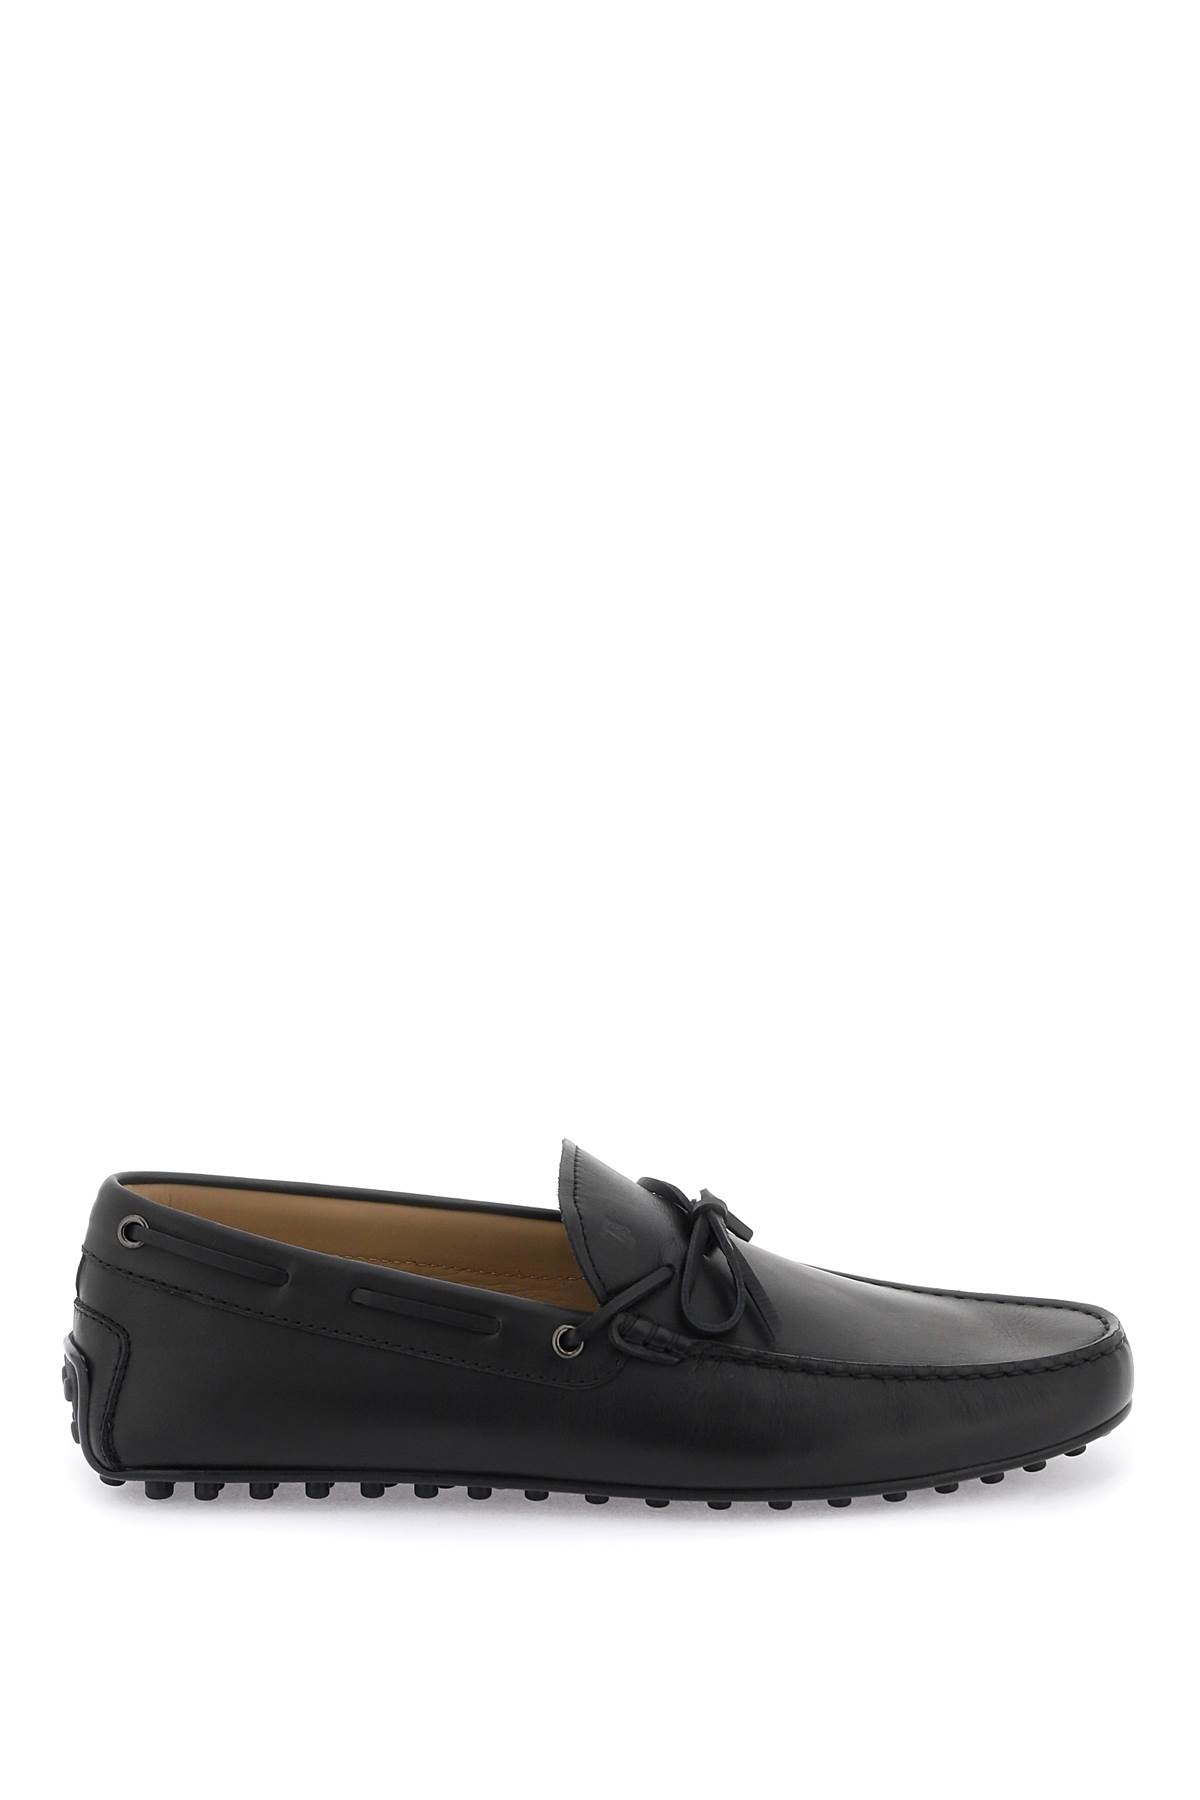 Tod'S 'City Gommino' Loafers-Tod'S-7-Urbanheer